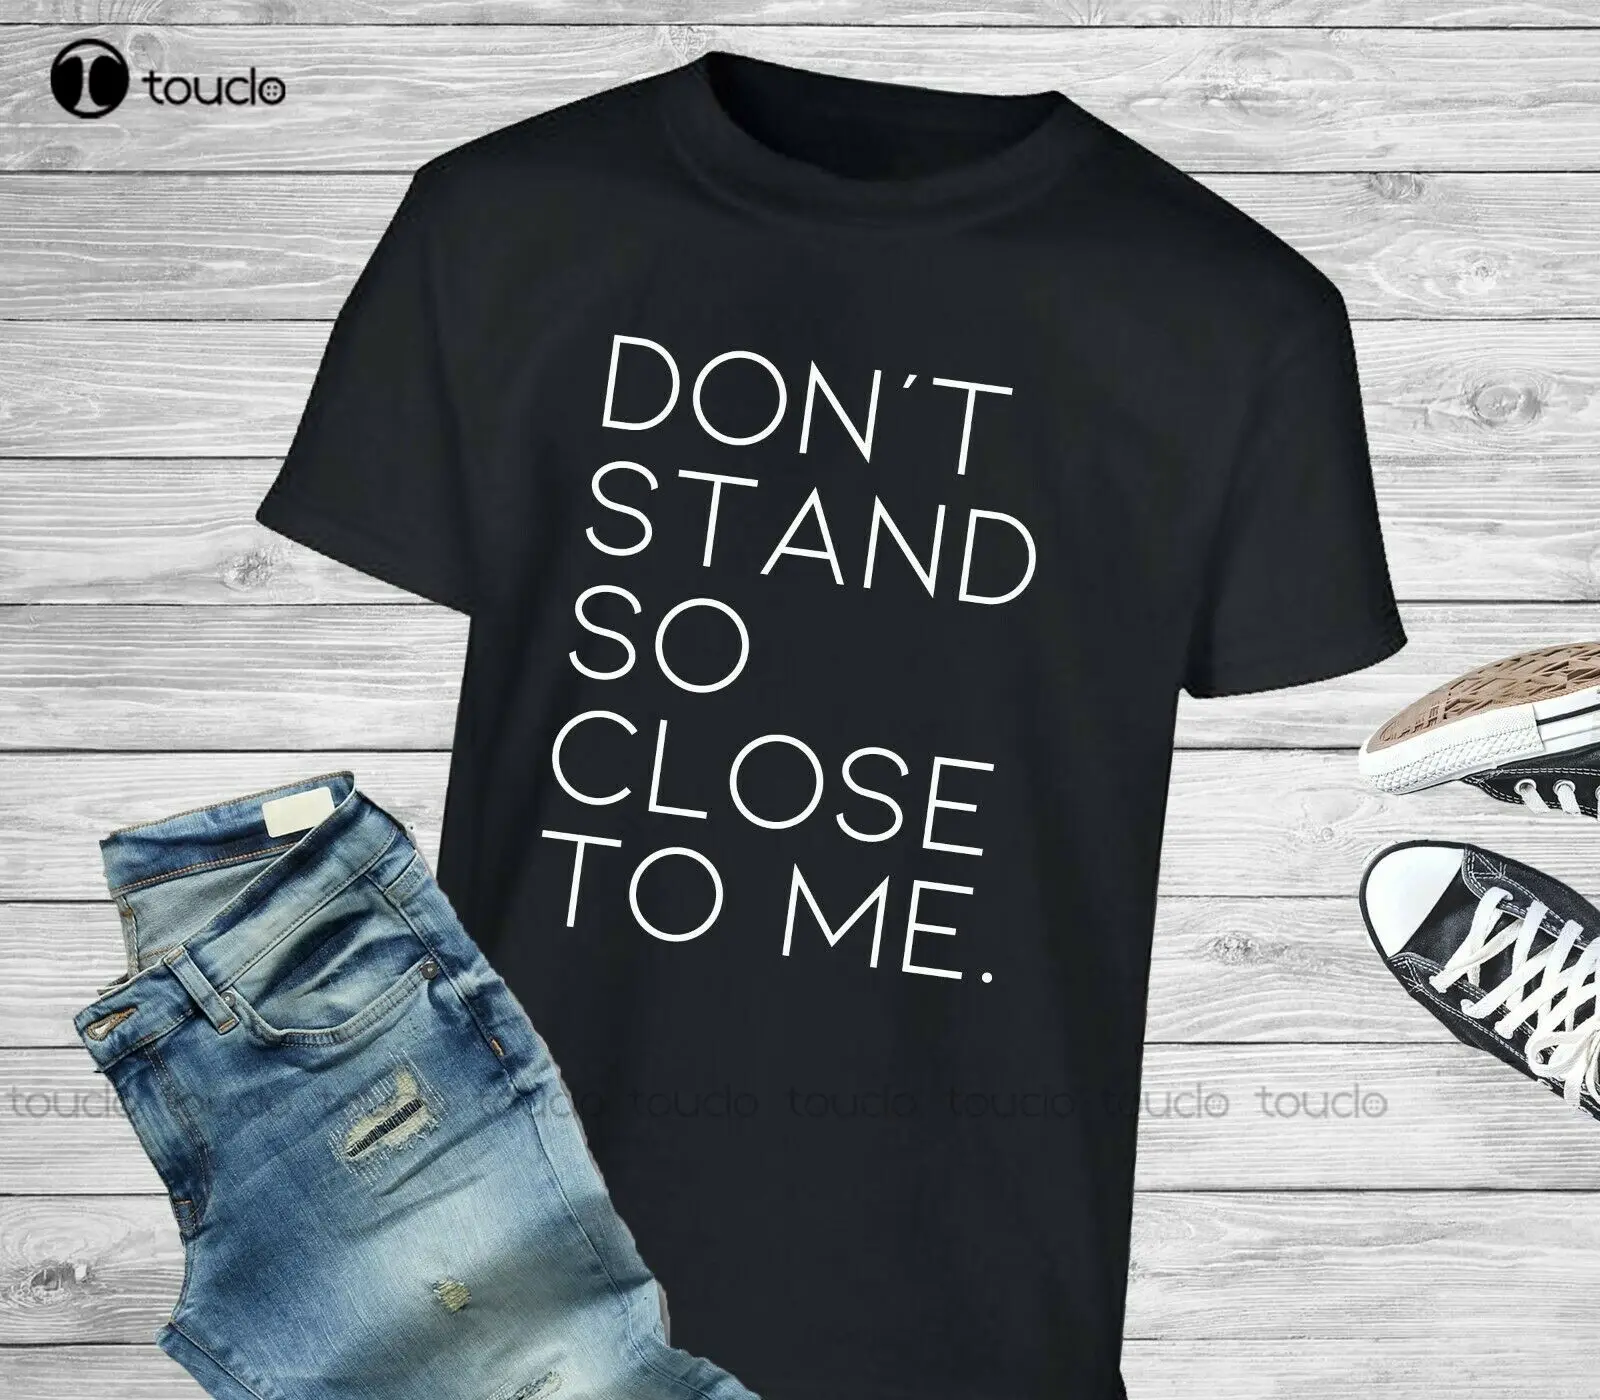 

Don'T Stand So Close To Me Novelty Police Social Distancing T-Shirt/Tee Unisex Women Men Tee Shirt